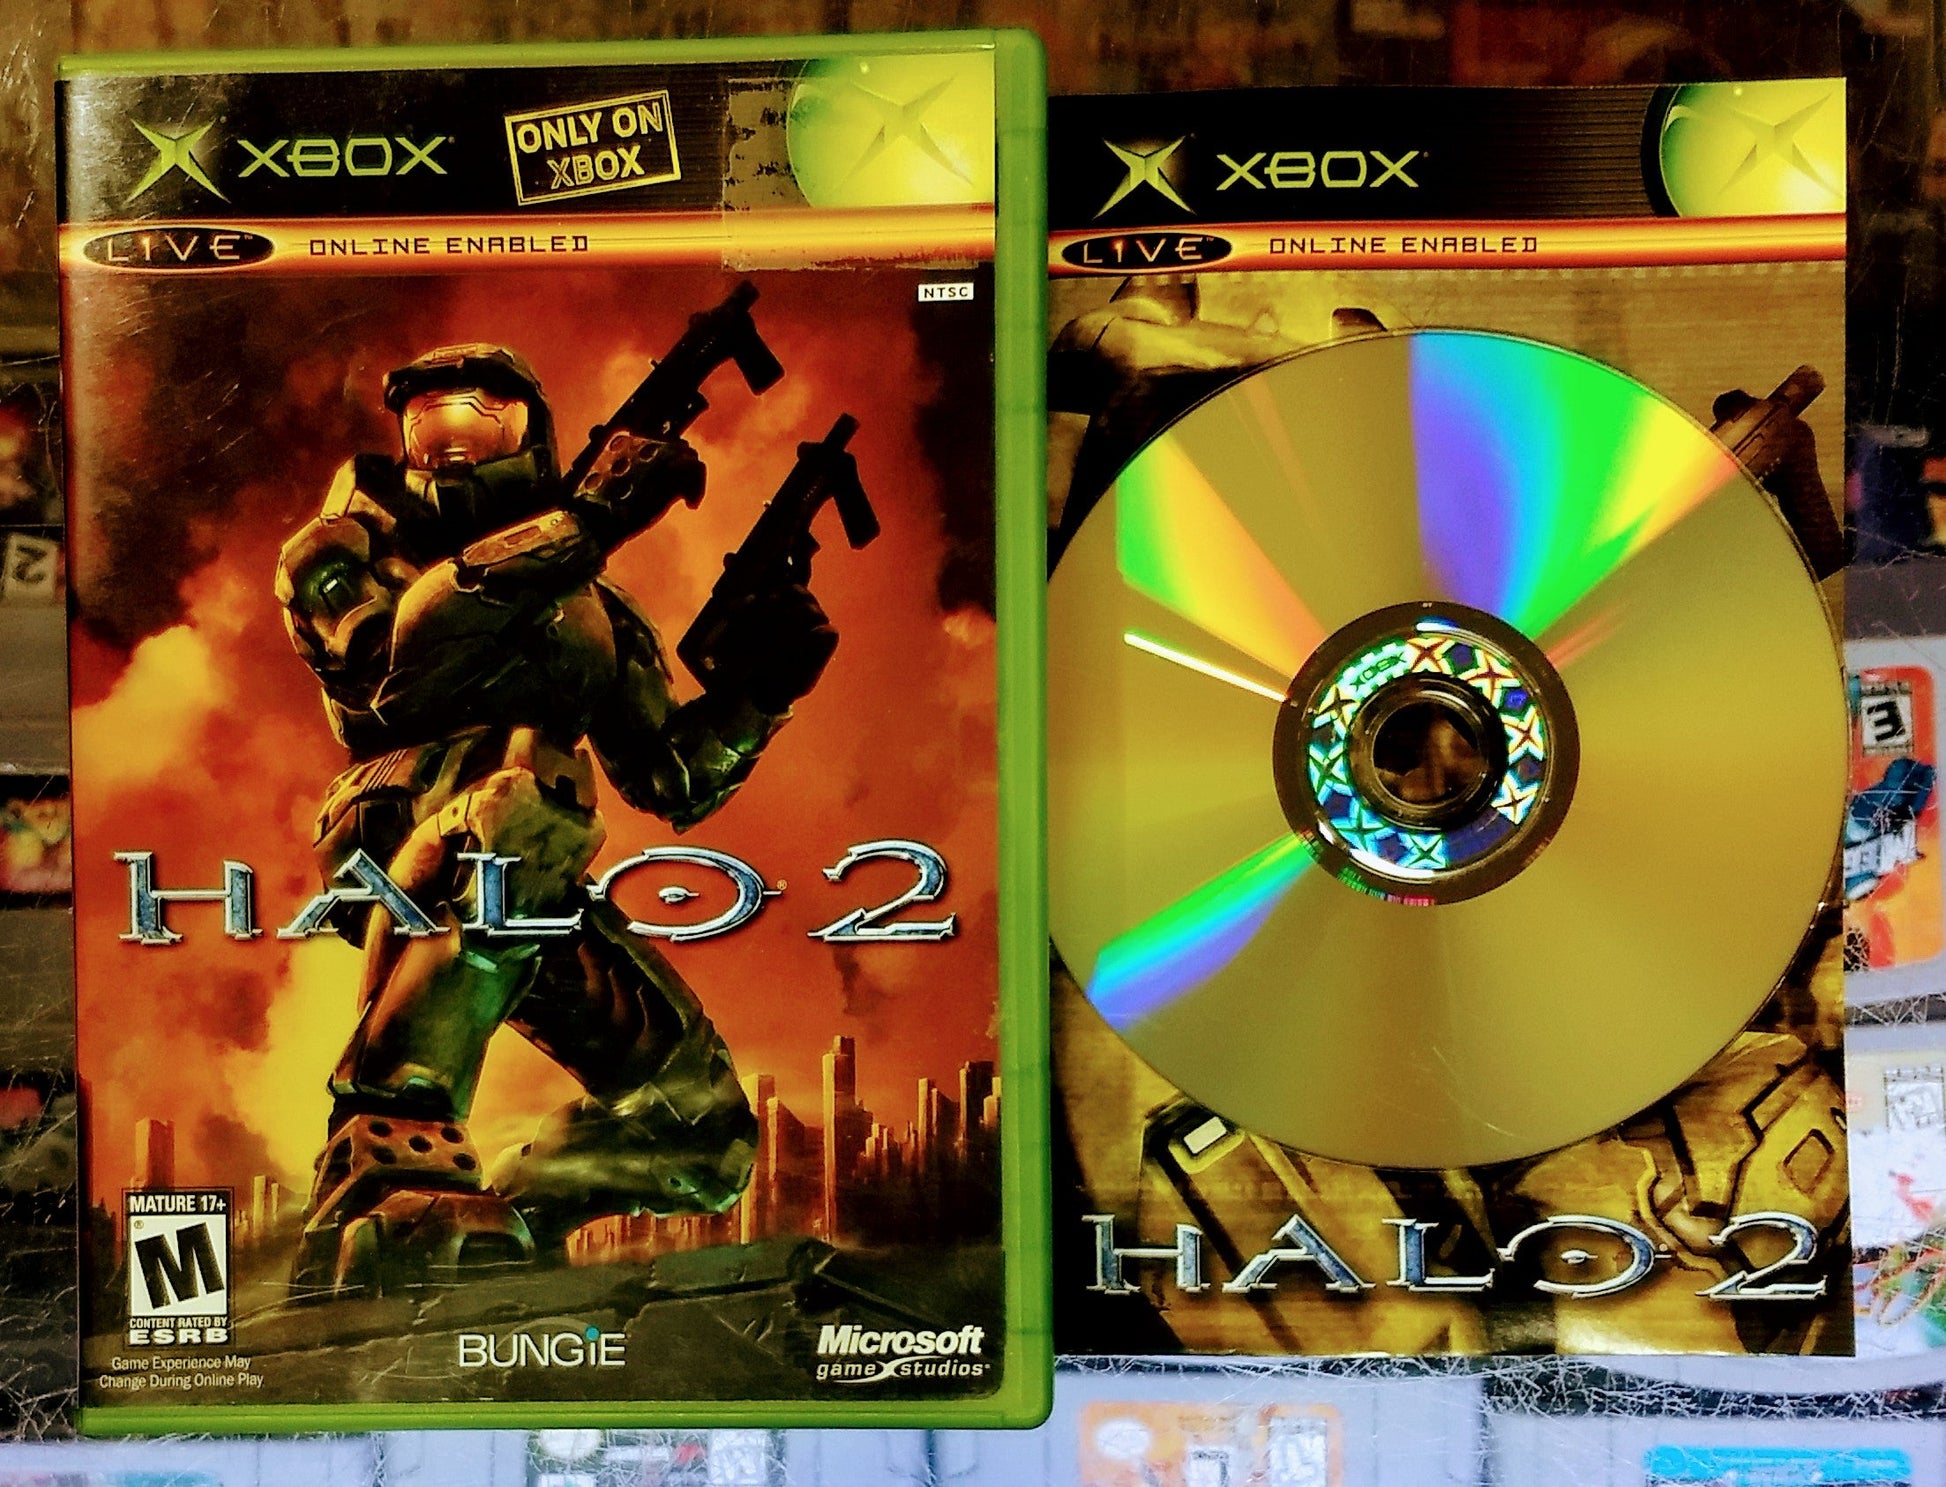 HALO 2 (XBOX) - jeux video game-x